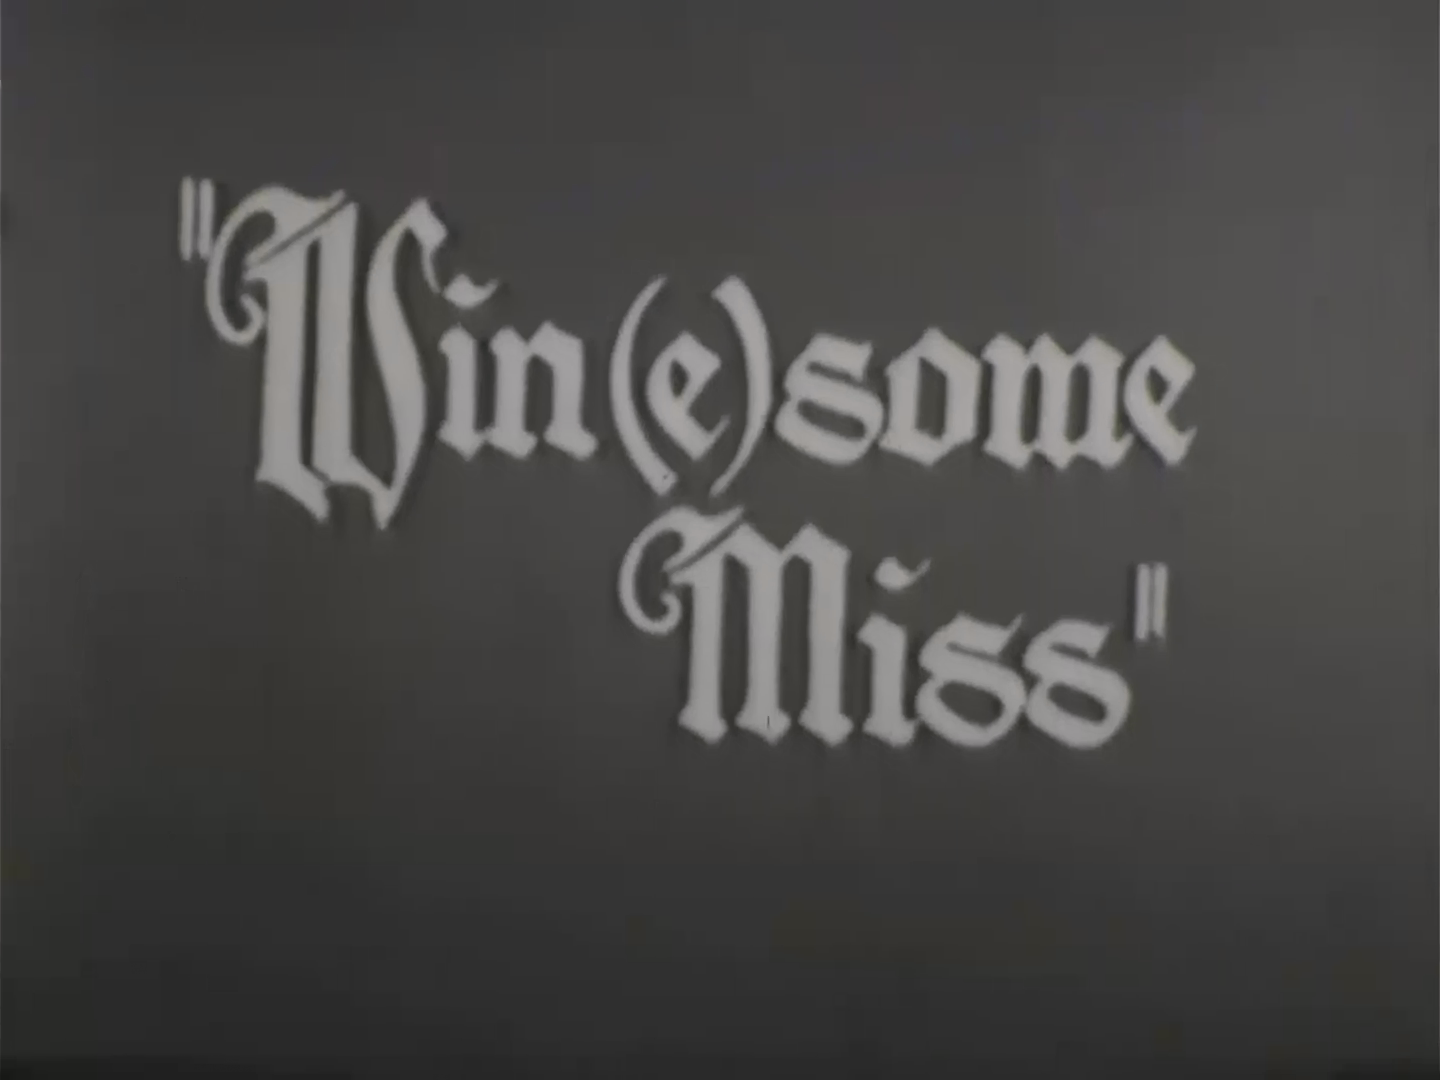 Win(e)some Miss